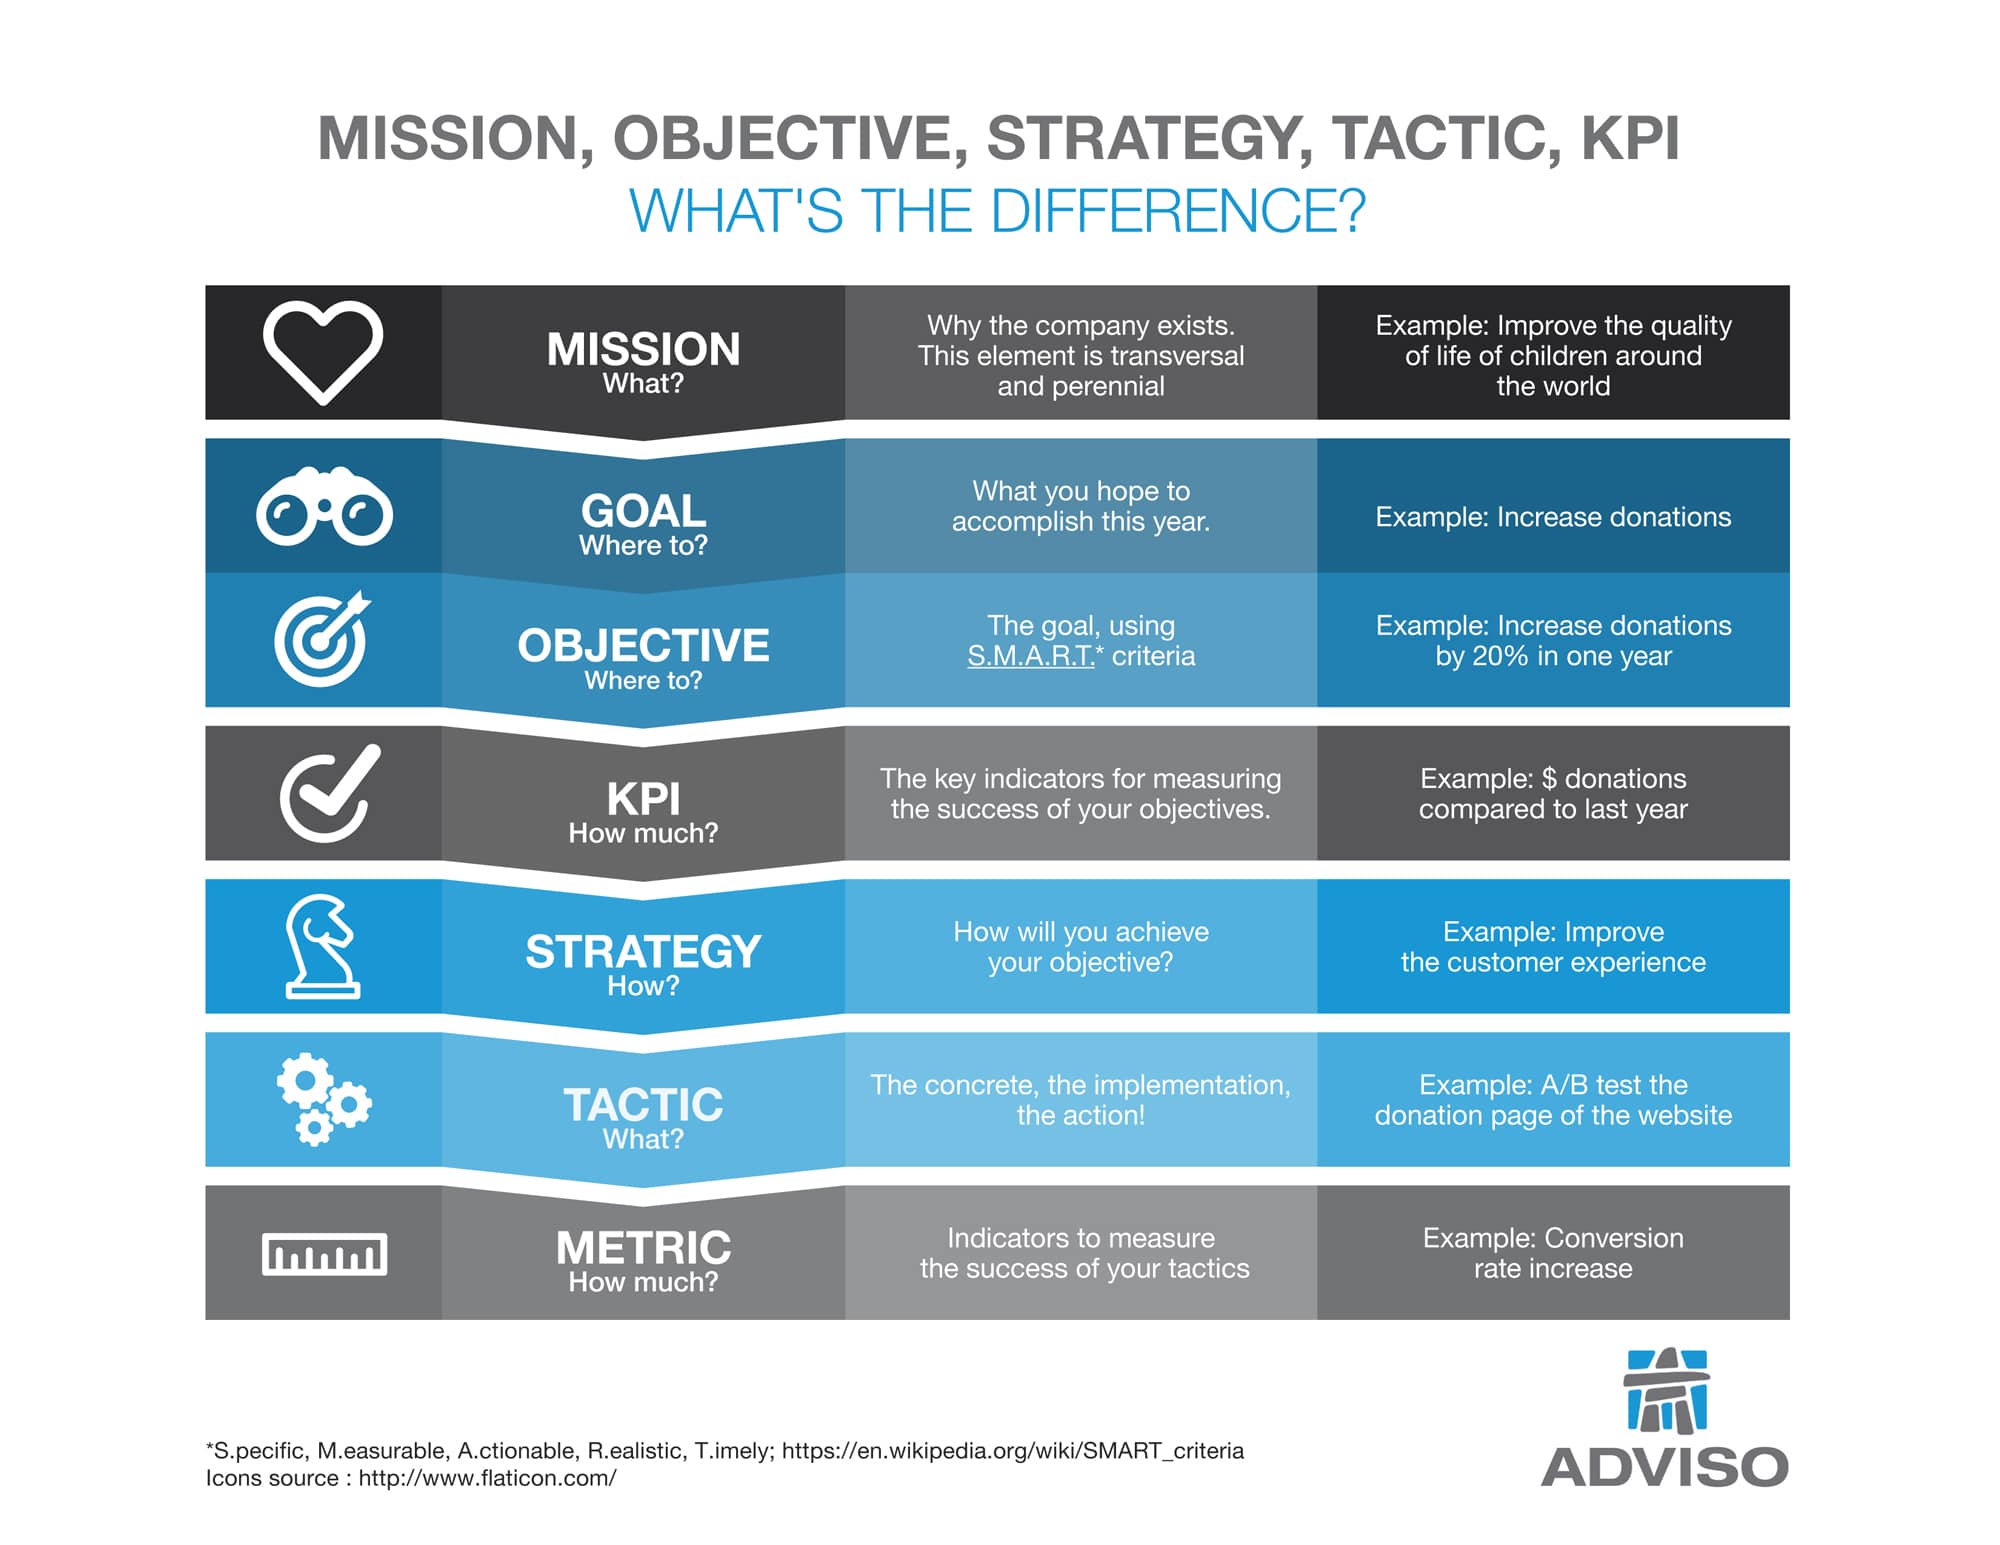 Adviso_Infographic objective, tactic, strategy